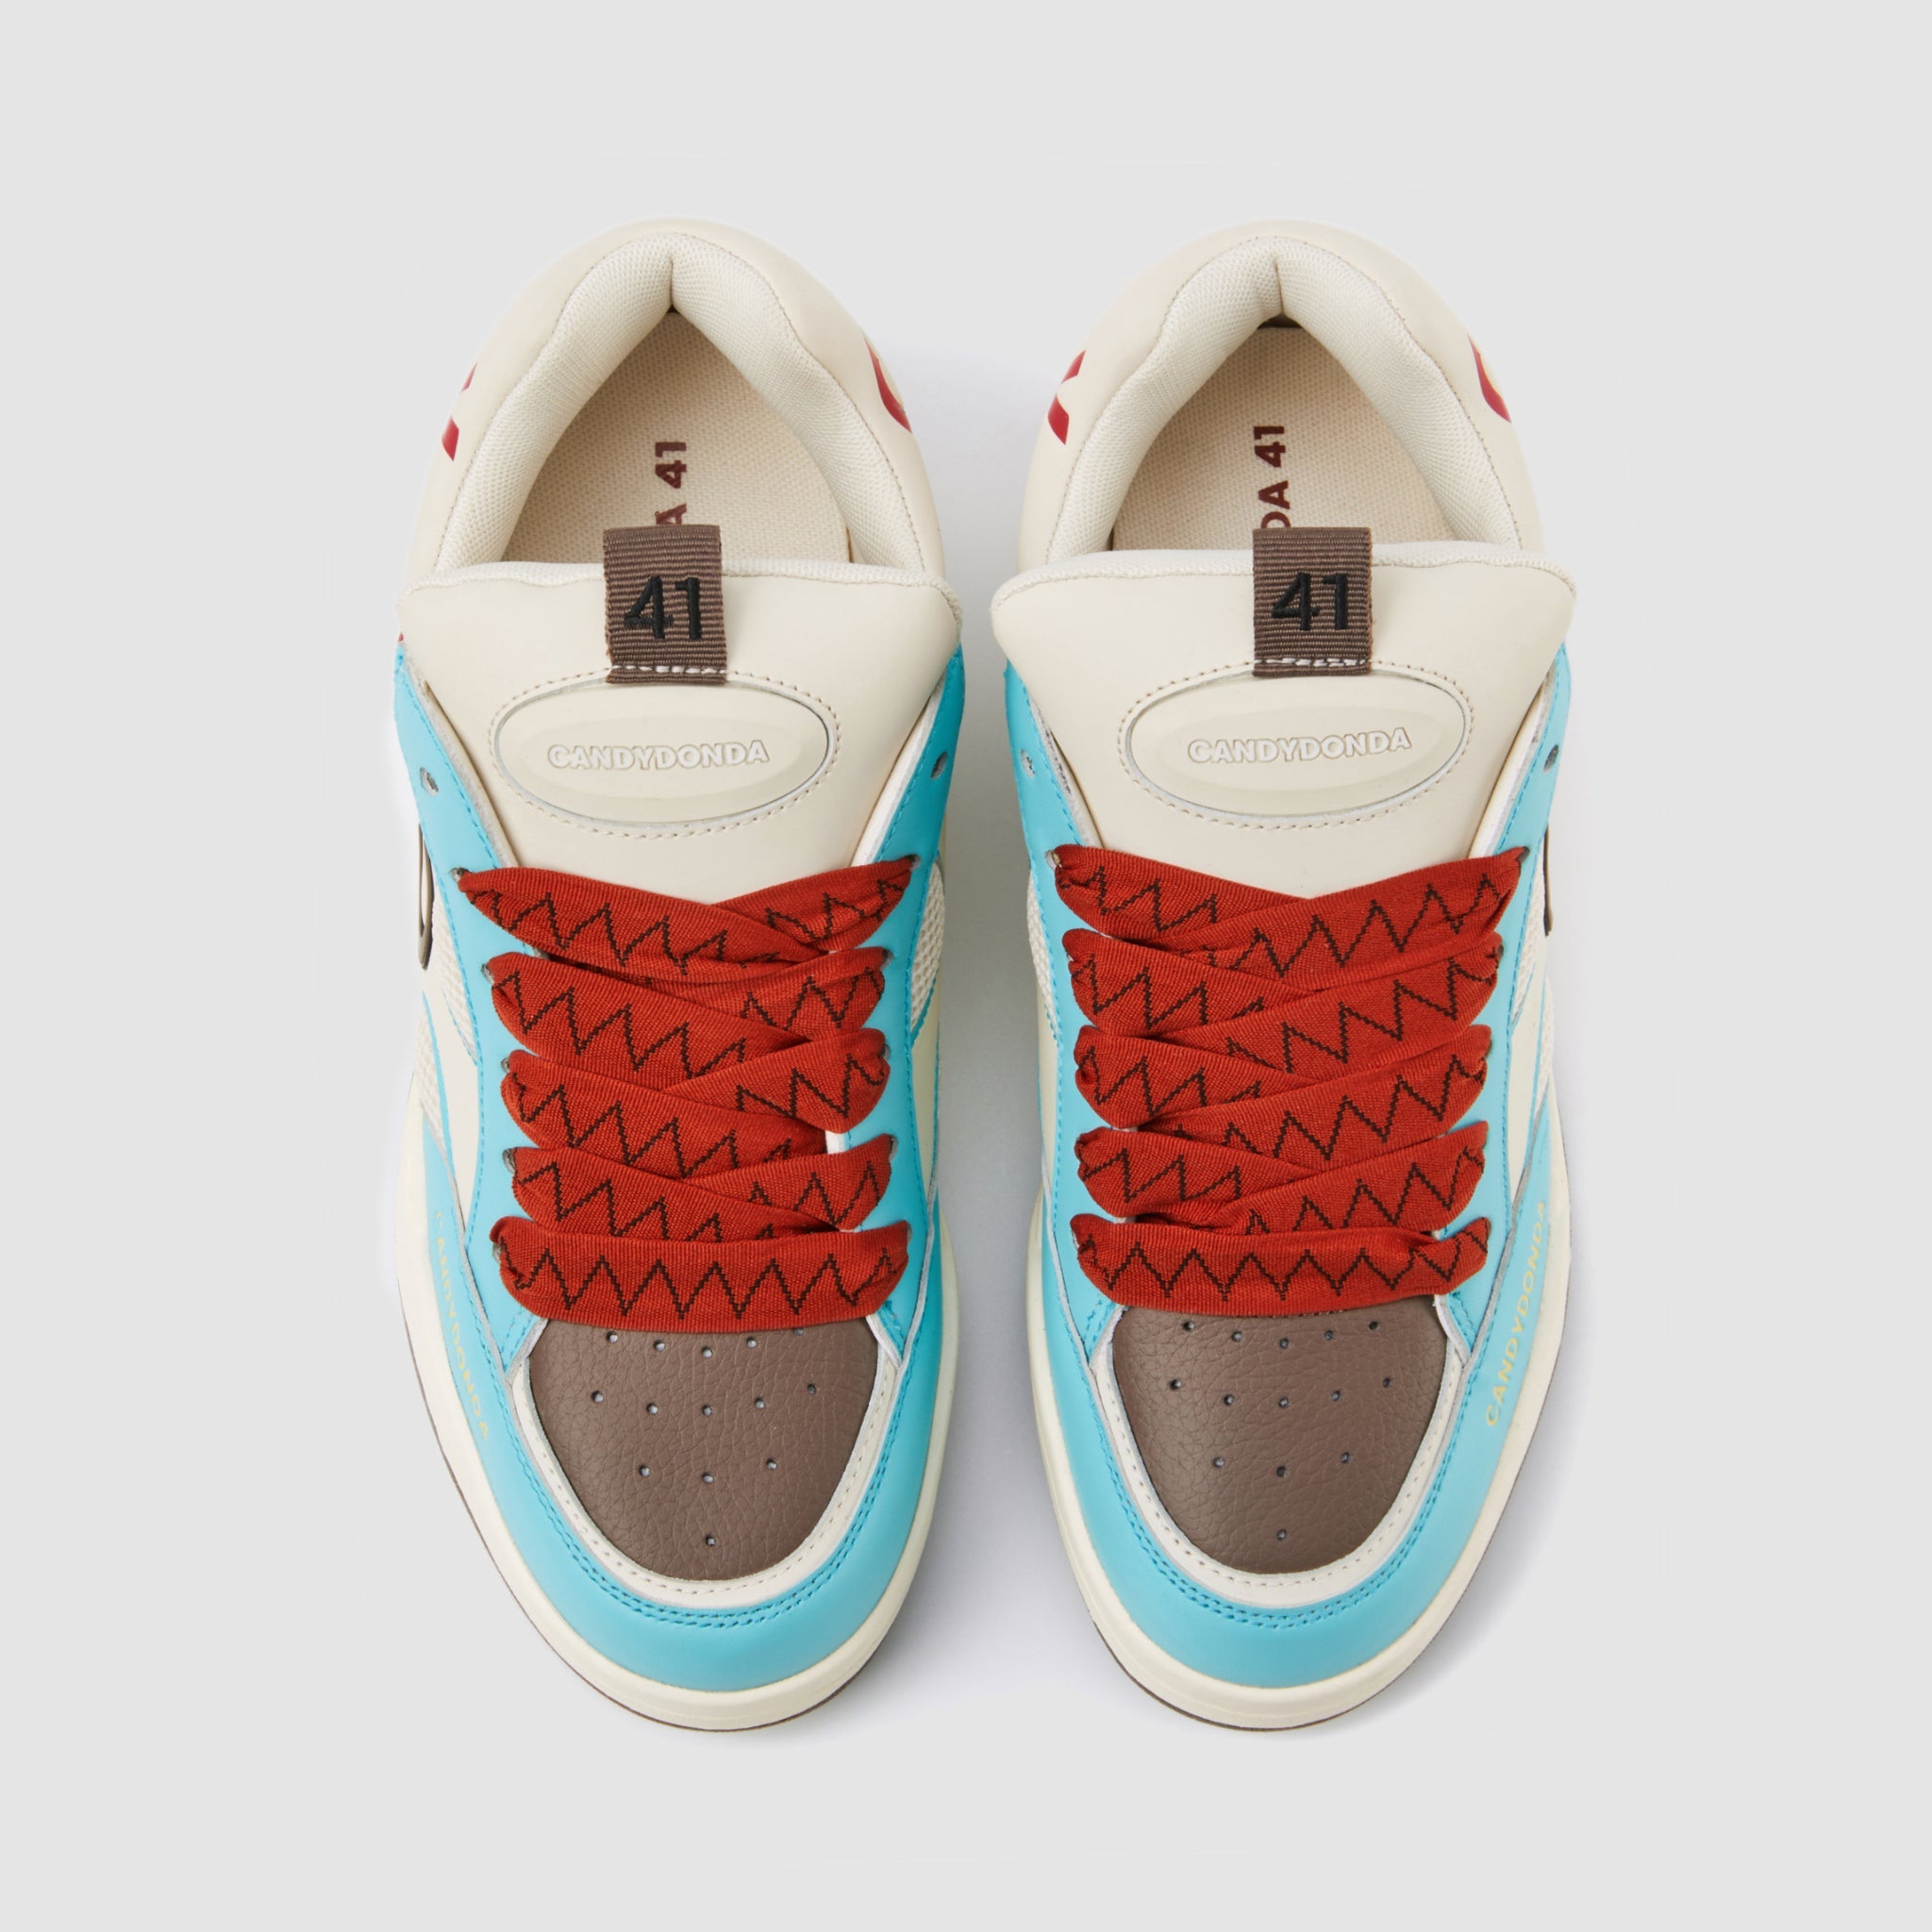 CANDYDONDA Red Shoelace Sneakers | MADA IN CHINA